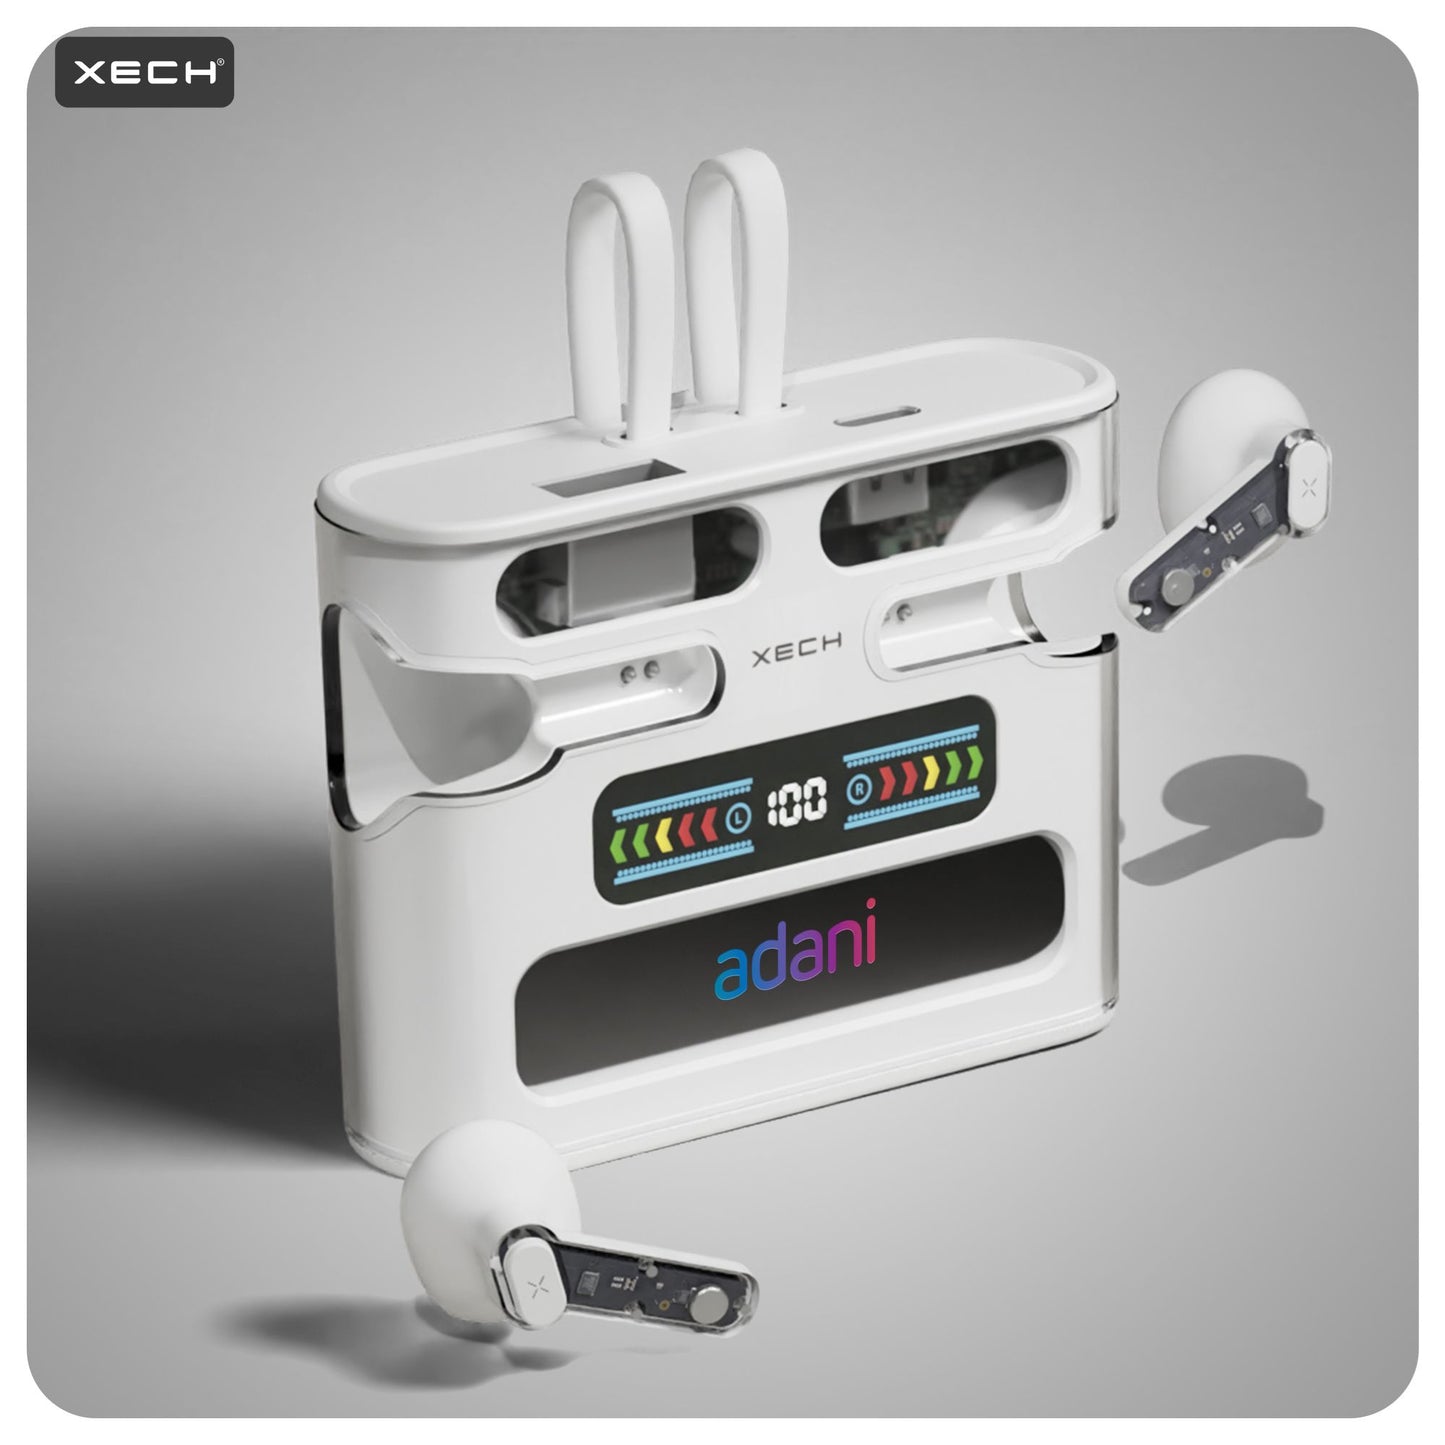 Multifunctional TWS earbuds by XECH is best for employee gifting & client gifts this festive season